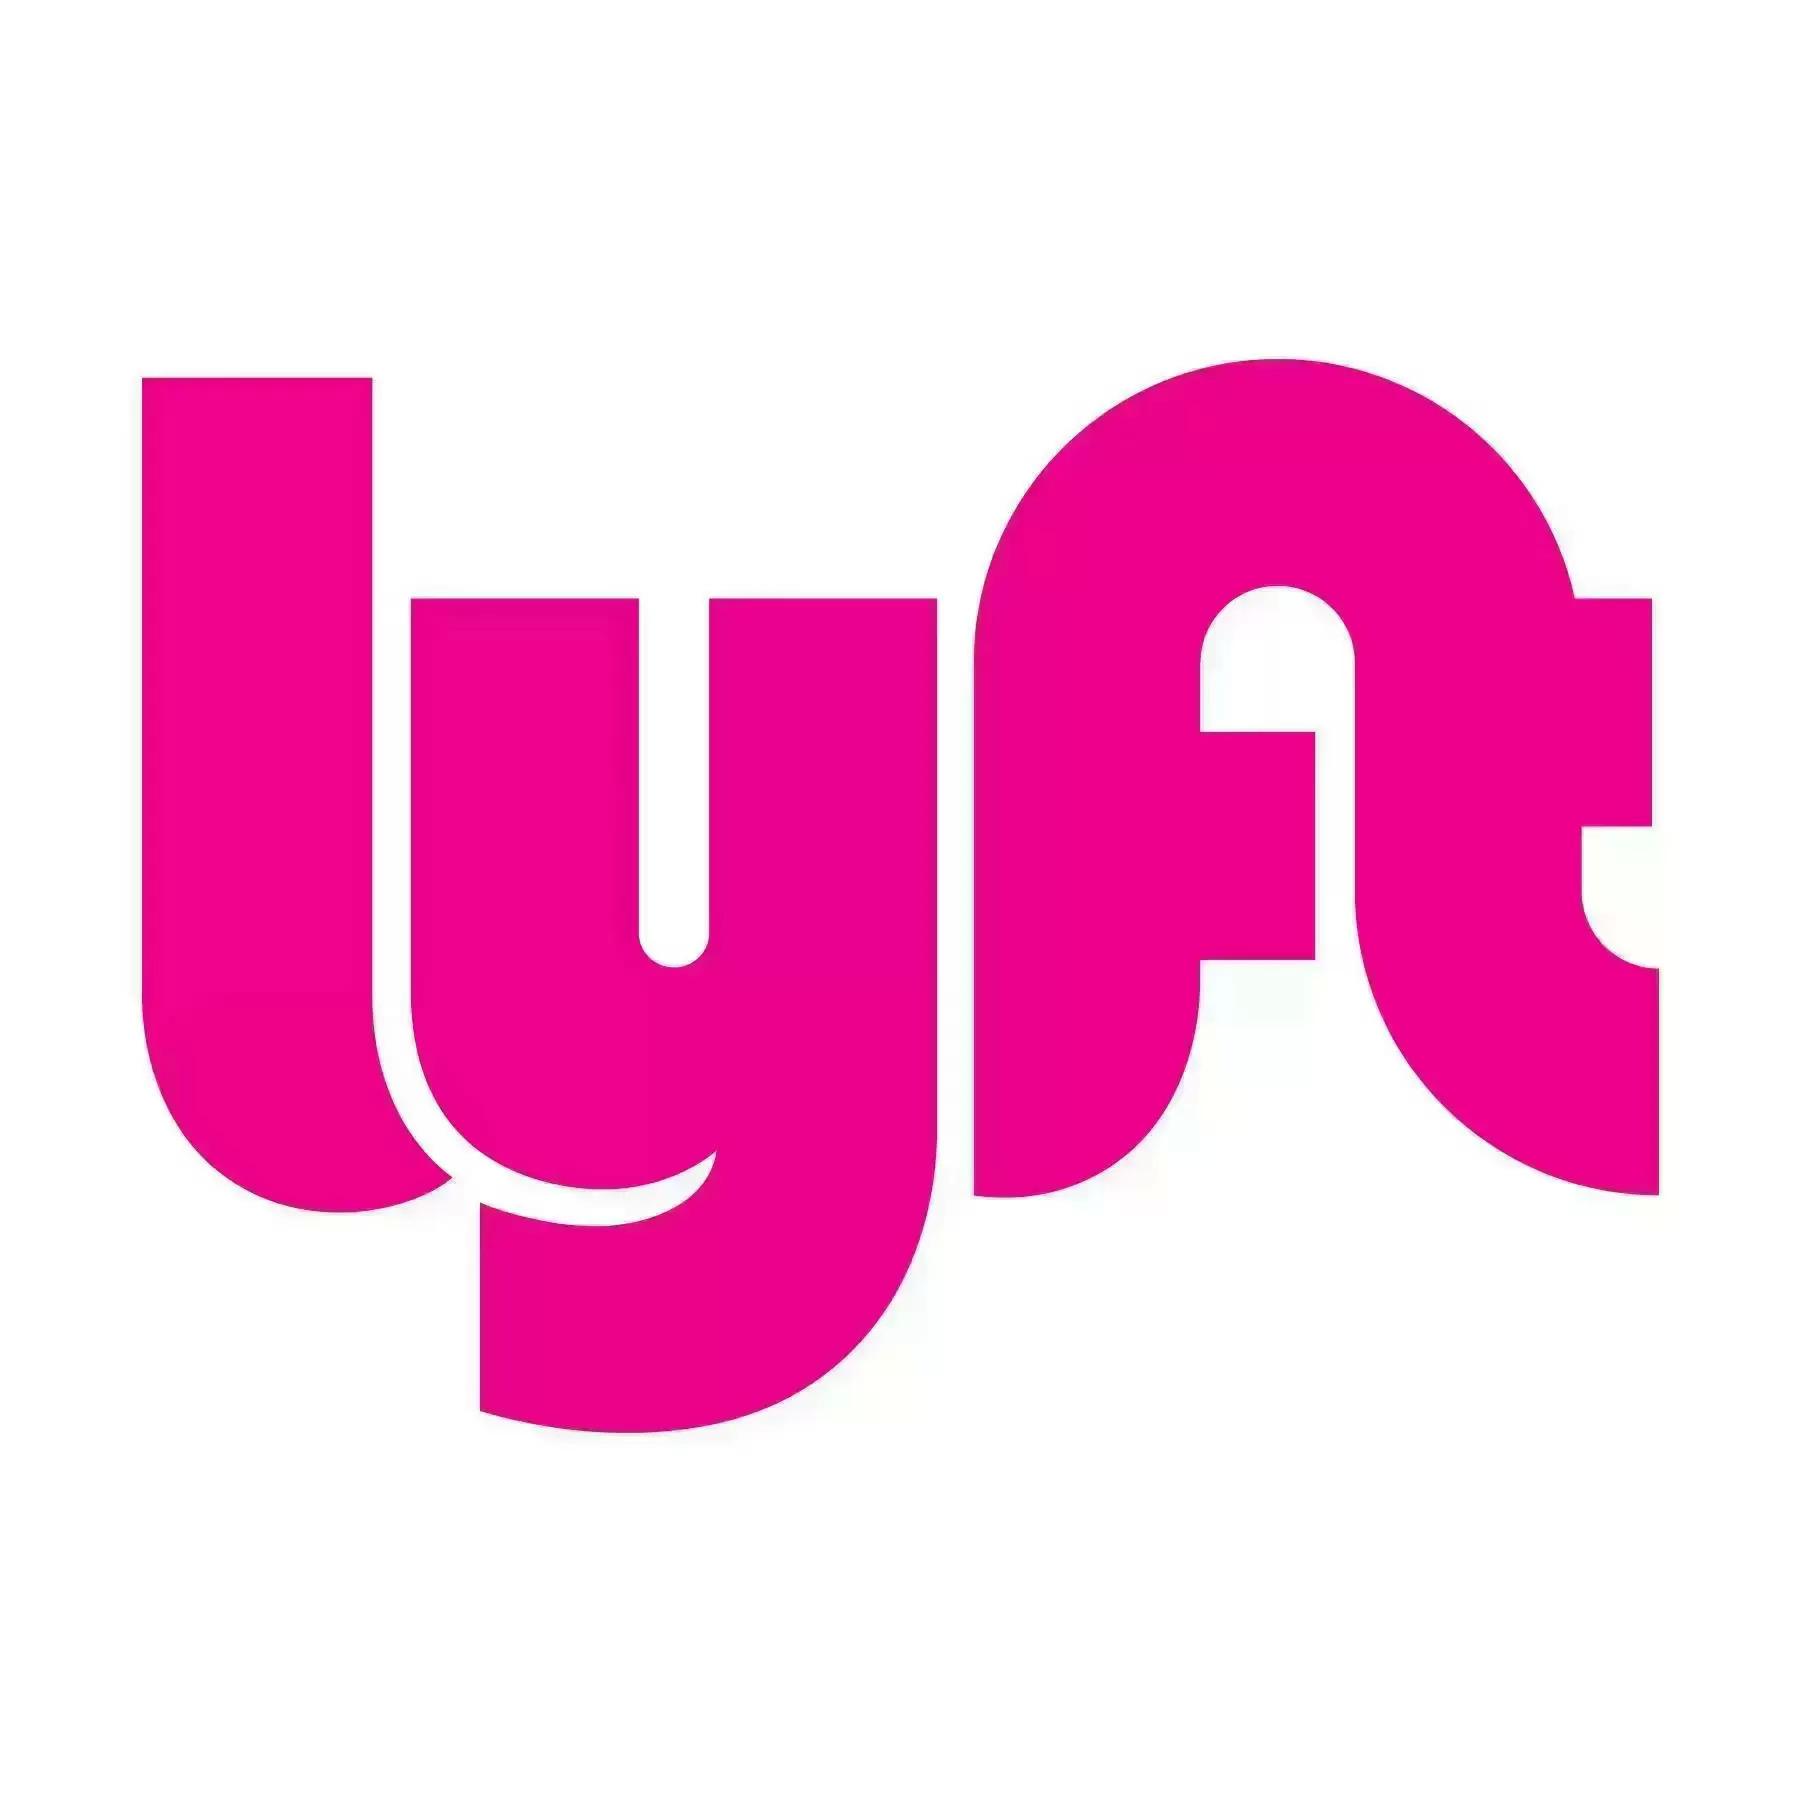 How to Get Lyft Rides for 10% Off